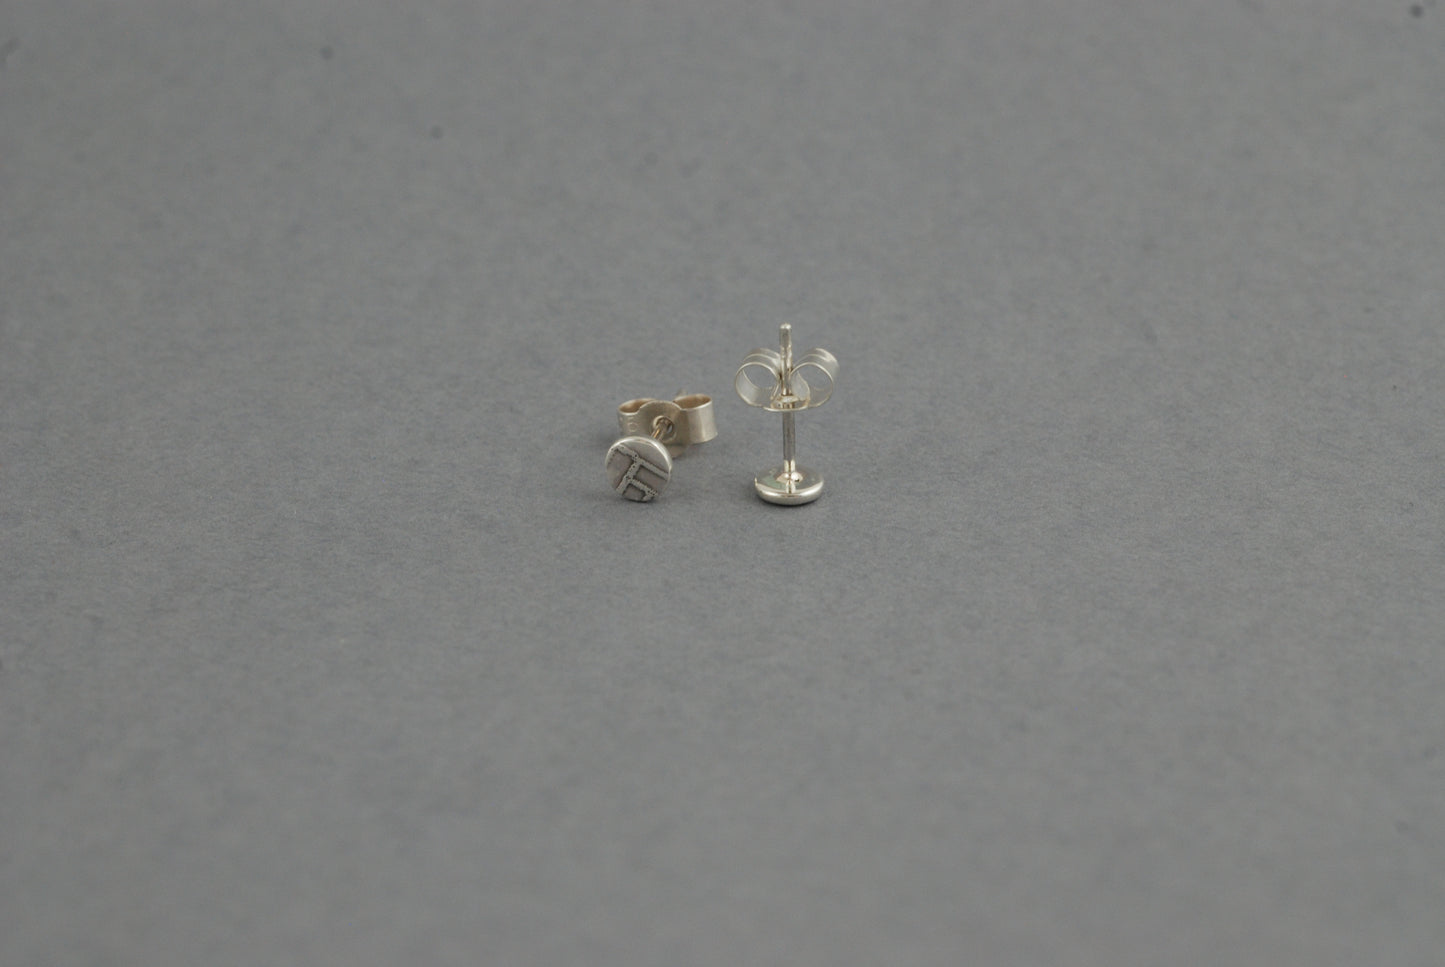 Tiny Sterling Silver Stud Earrings with Woven Texture